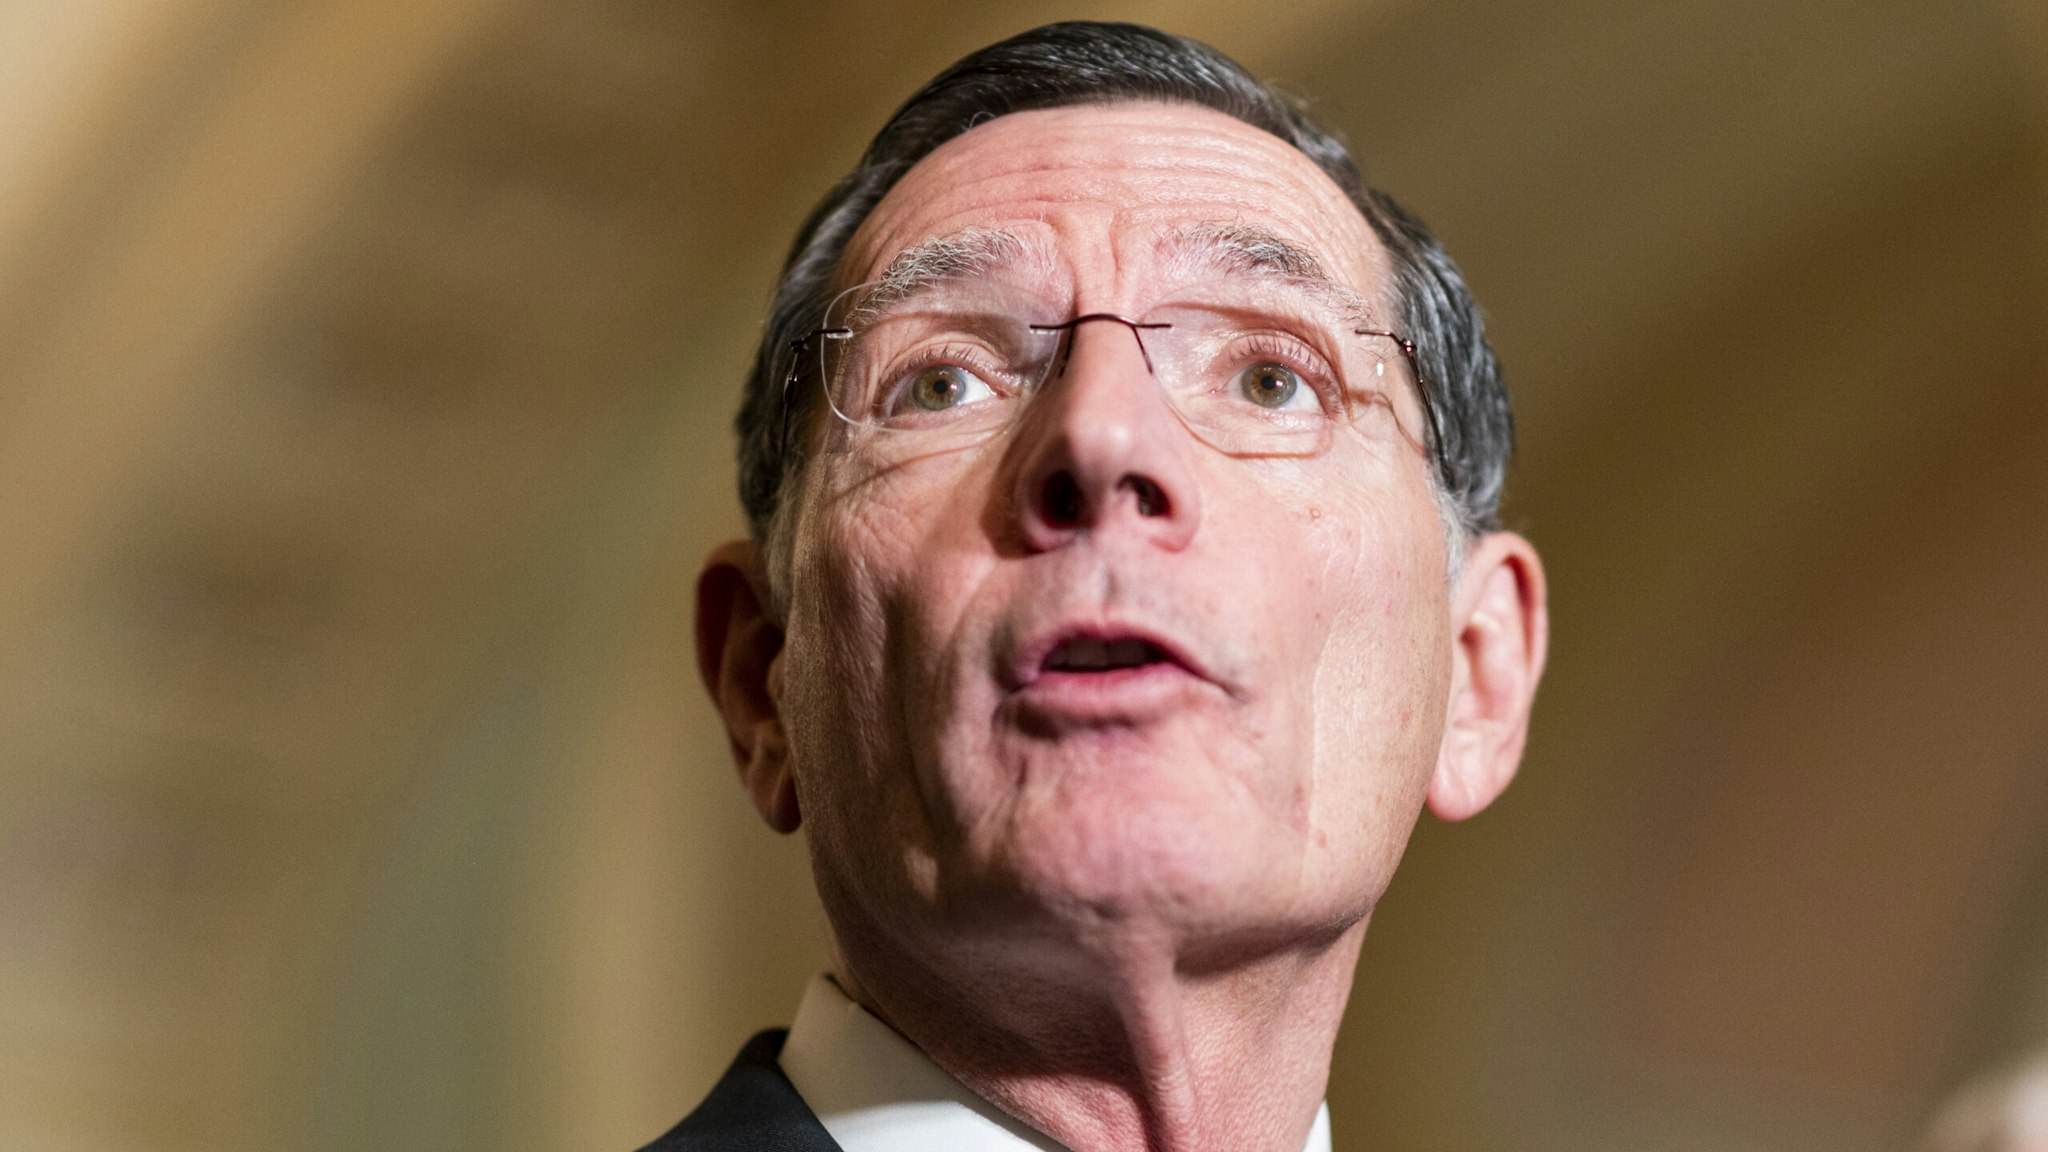 UNITED STATES - NOVEMBER 30: Sen. John Barrasso, R-Wyo., speaks during the Senate Republicans news conference in the Capitol on Tuesday, Nov. 30, 2021.